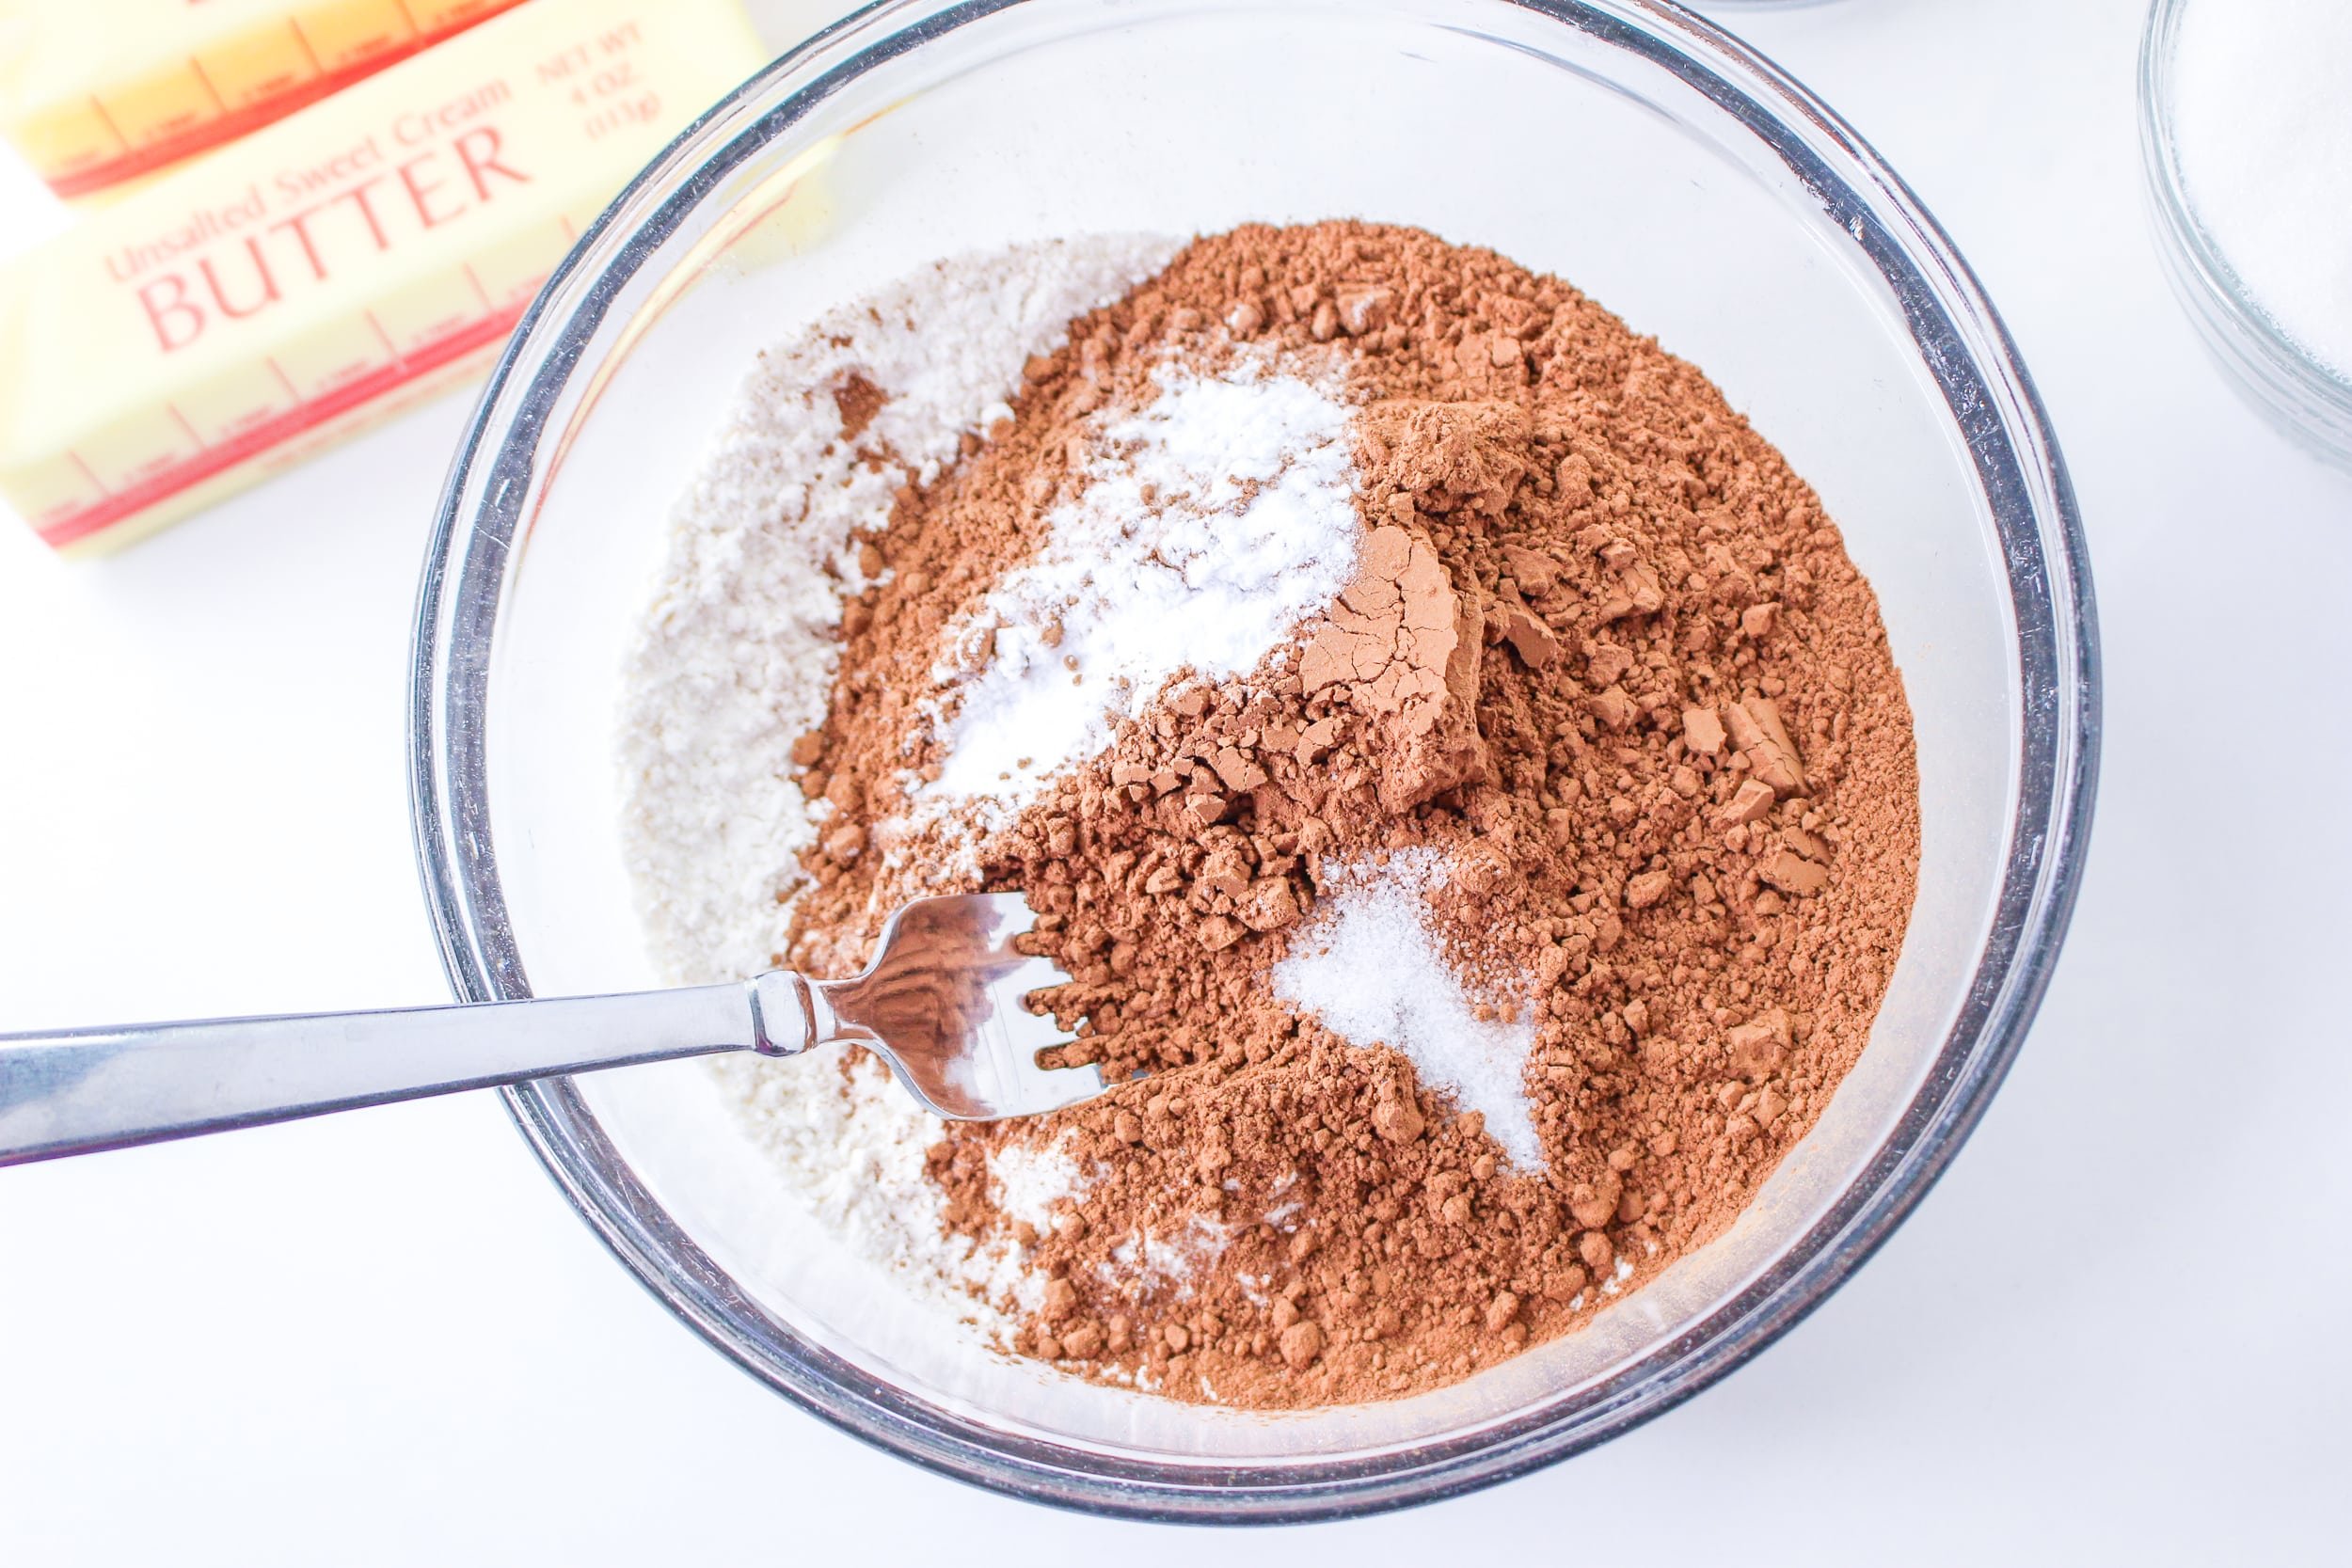 cocoa powder, baking powder, salt, and flour in a small mixing bowl